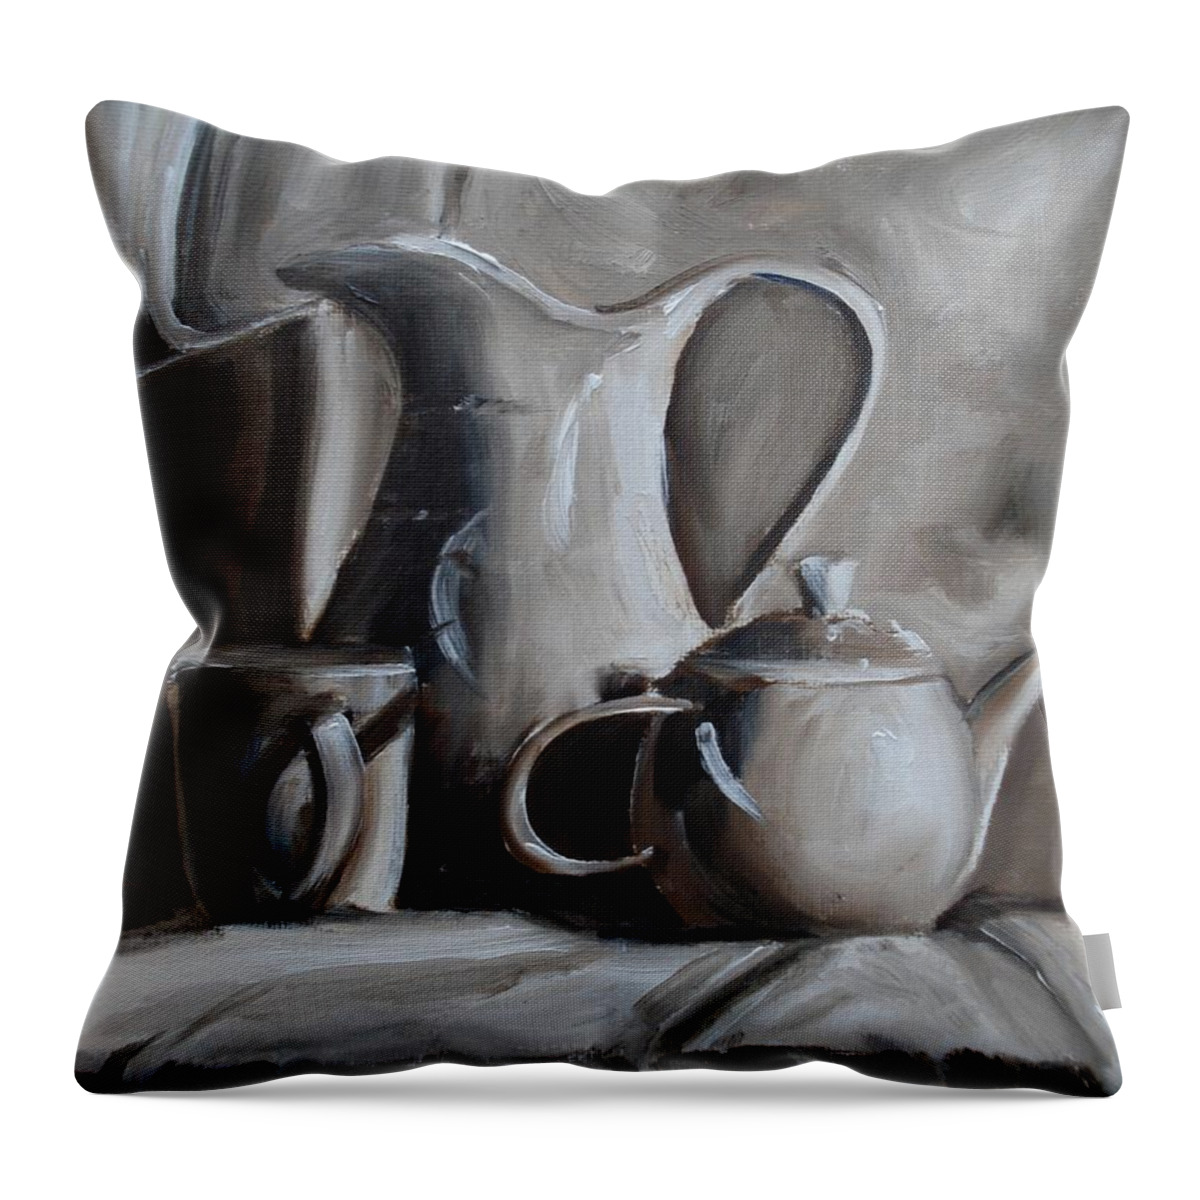 Sepia Still Life Throw Pillow featuring the painting Sepia Still Life by Donna Tuten